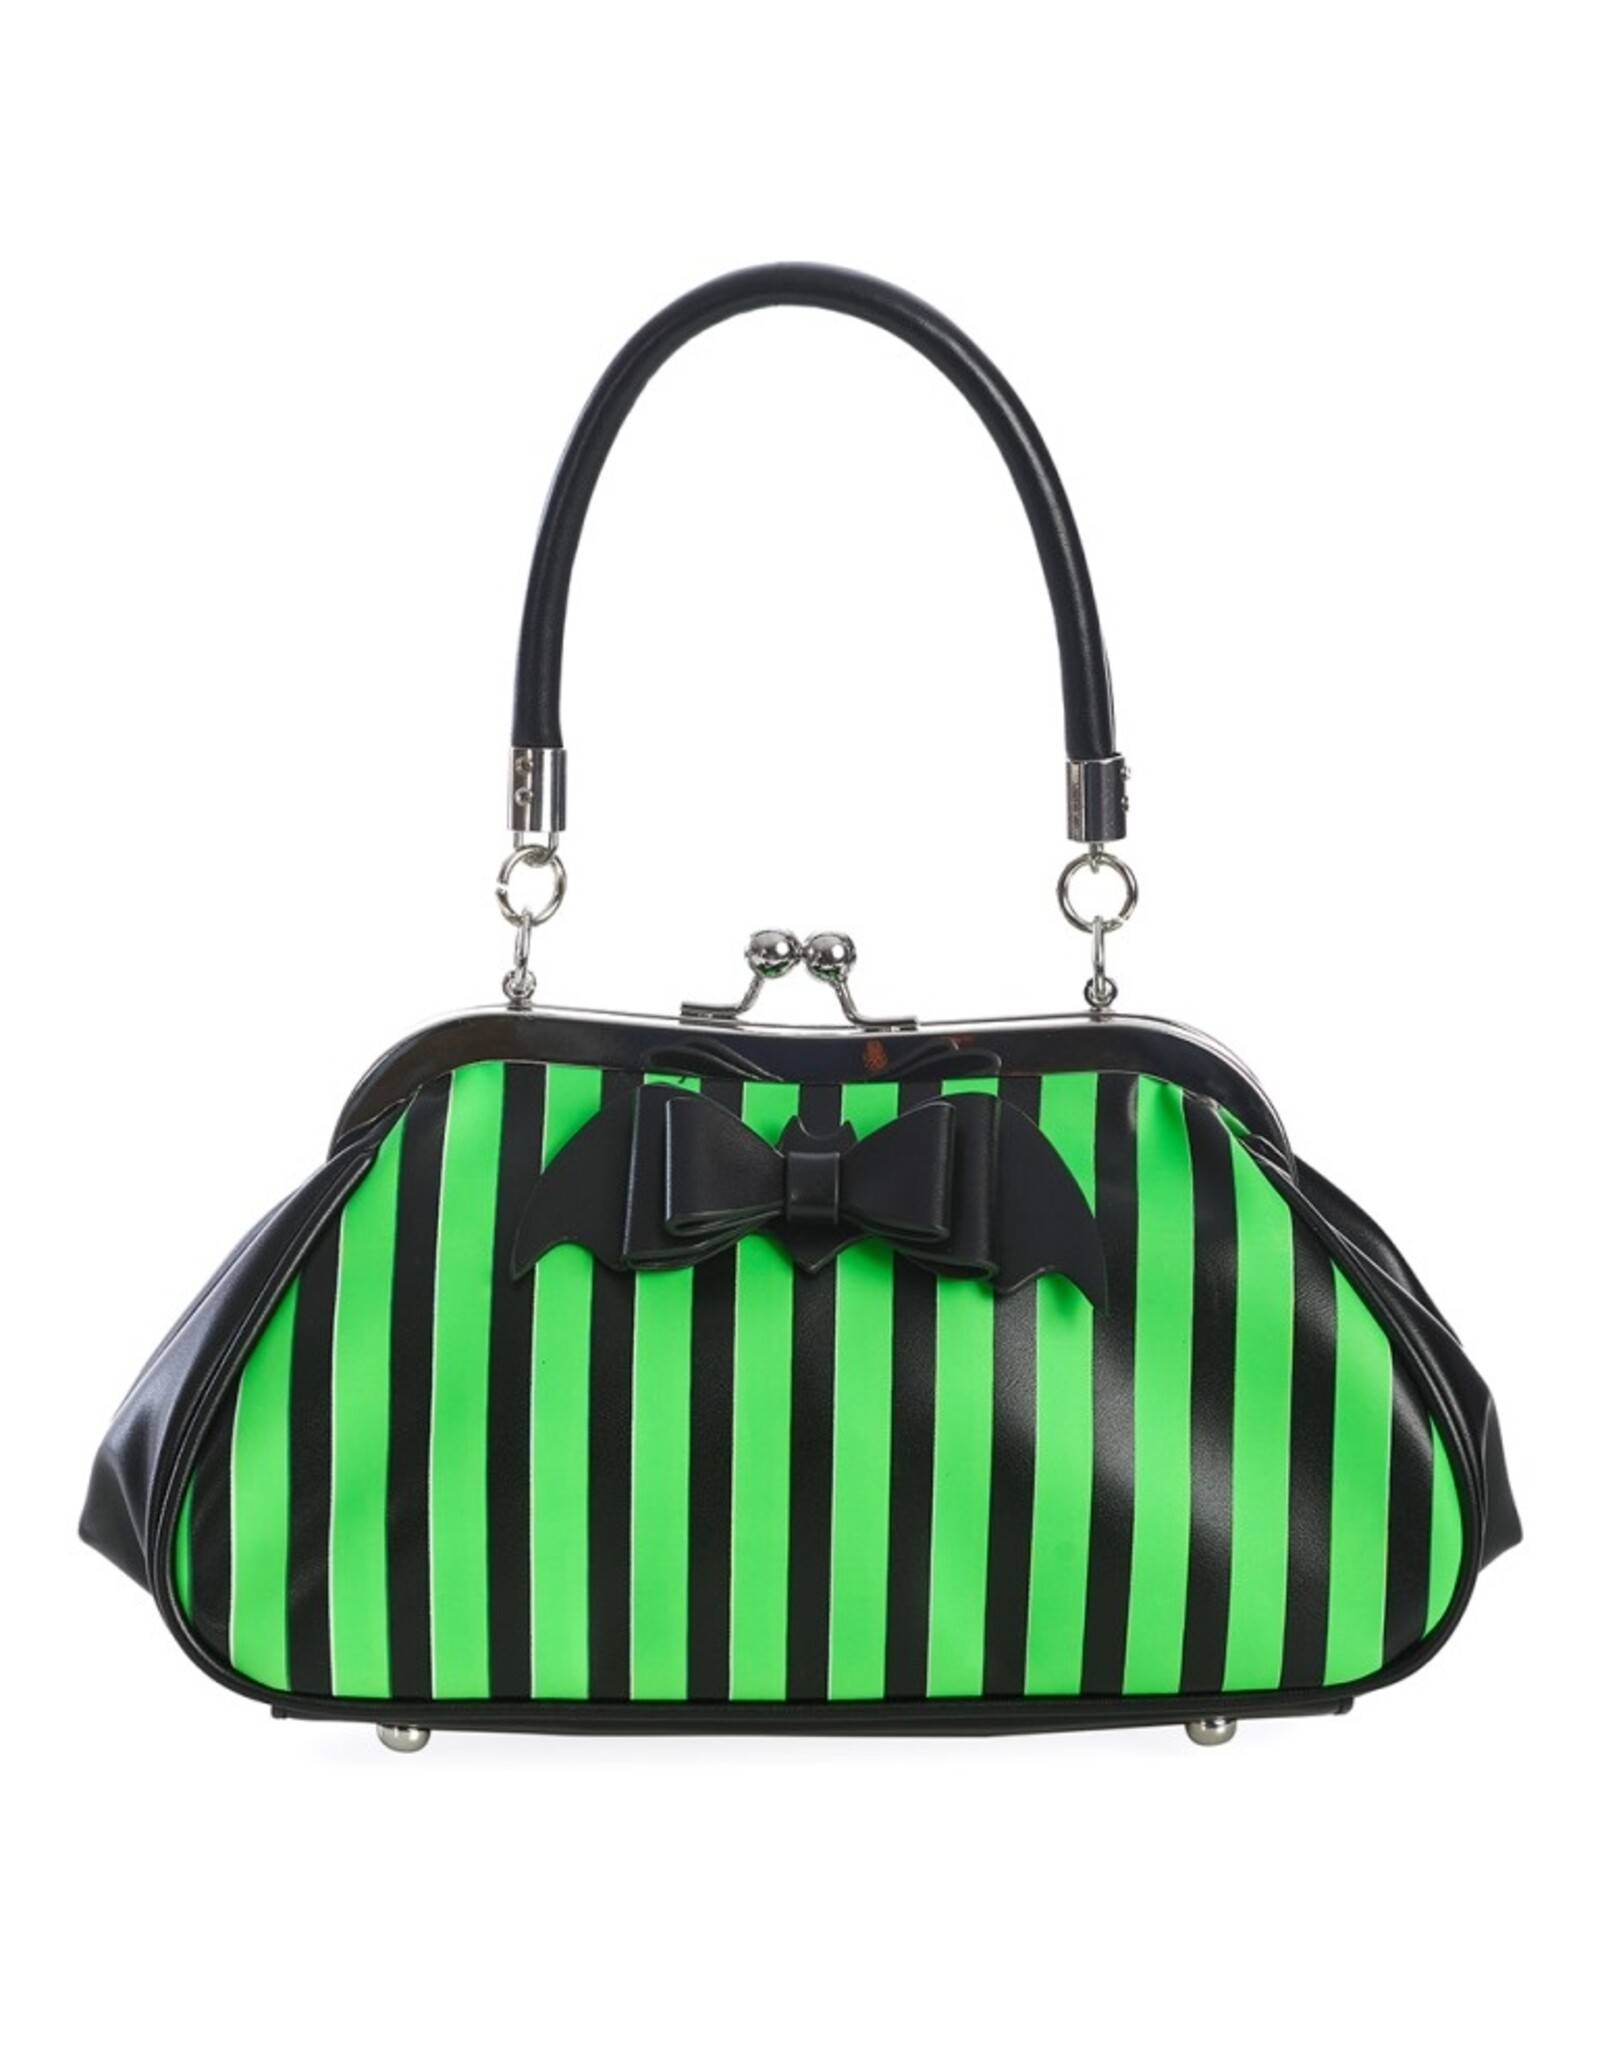 Banned Retro bags Vintage bags - Banned Night of Mystery Handbag Green-black